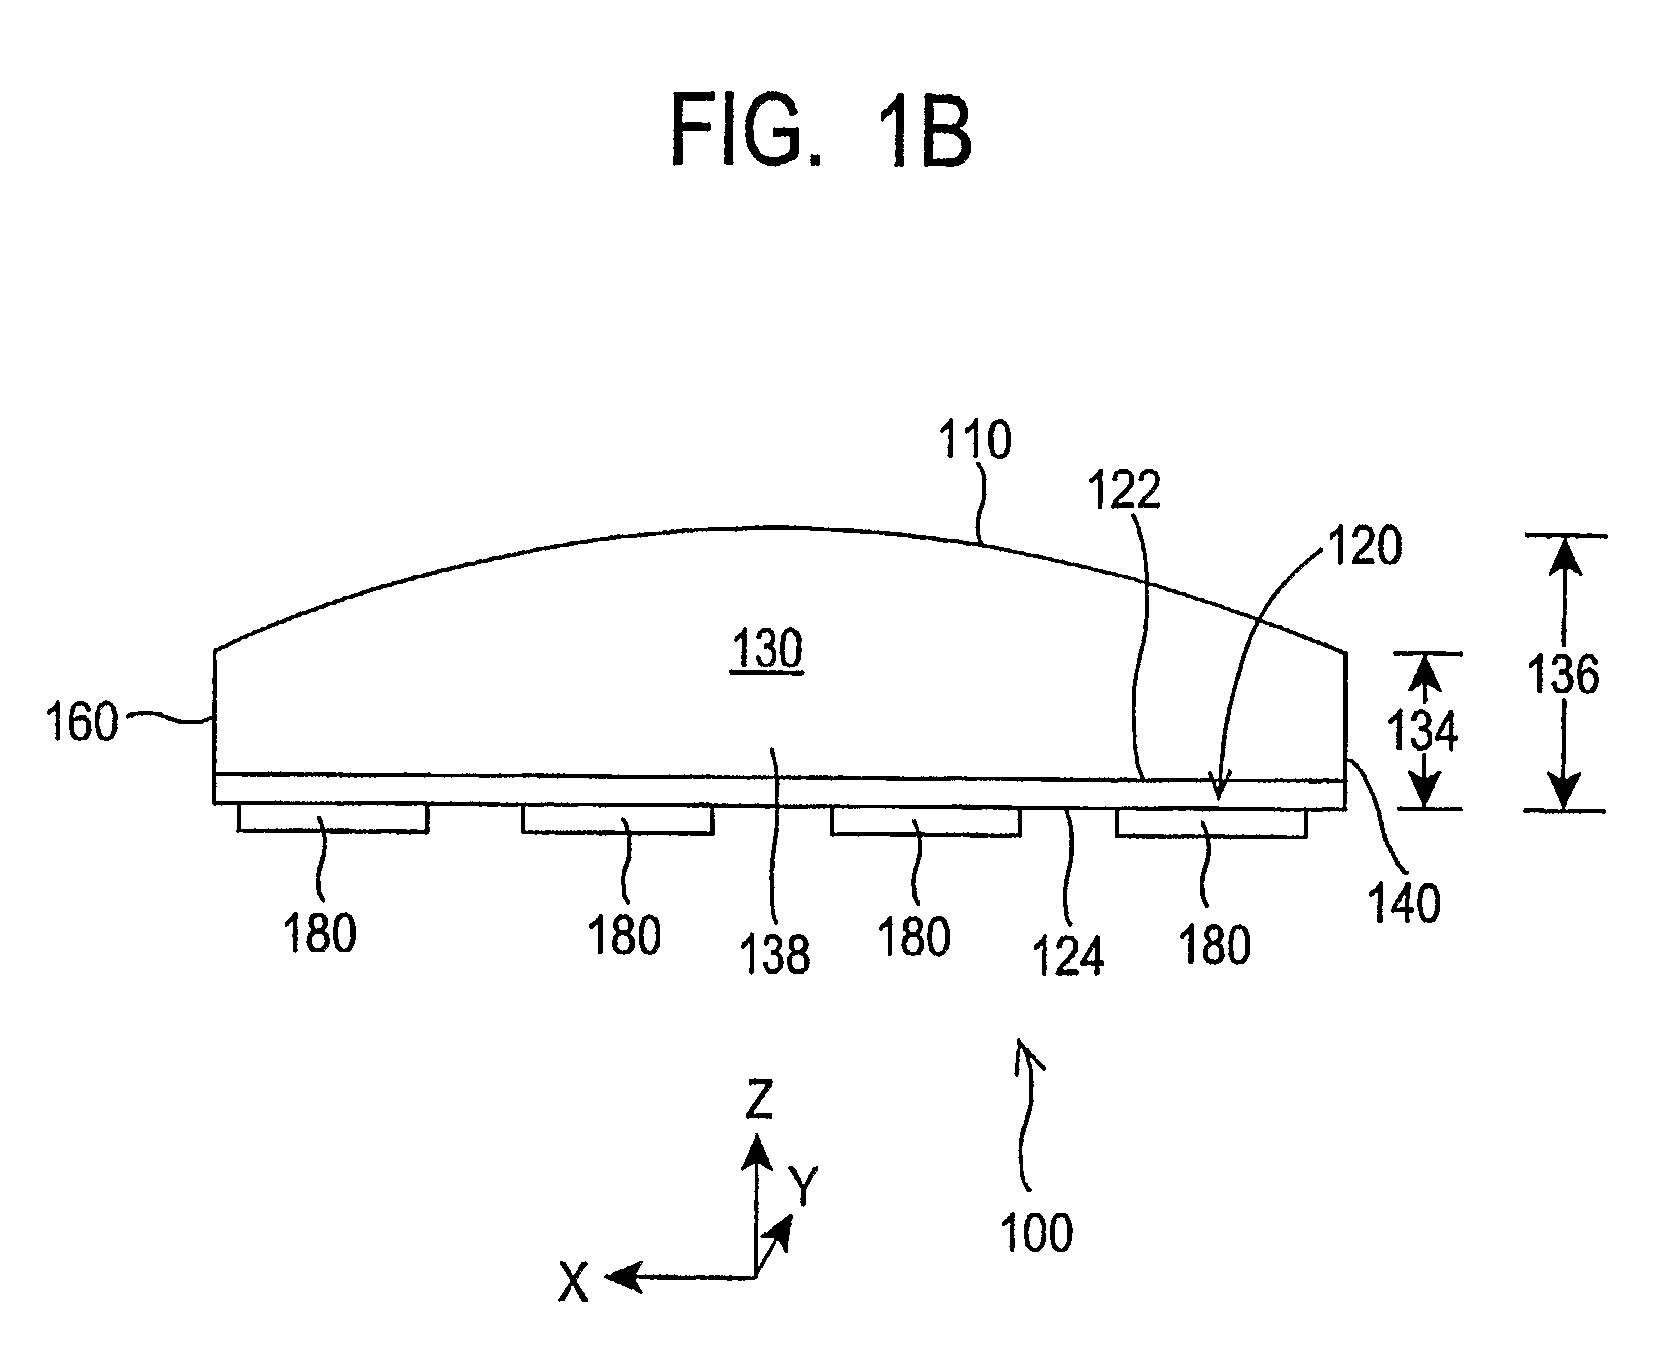 Ultrasound Apparatus and Method to Treat an Ischemic Stroke